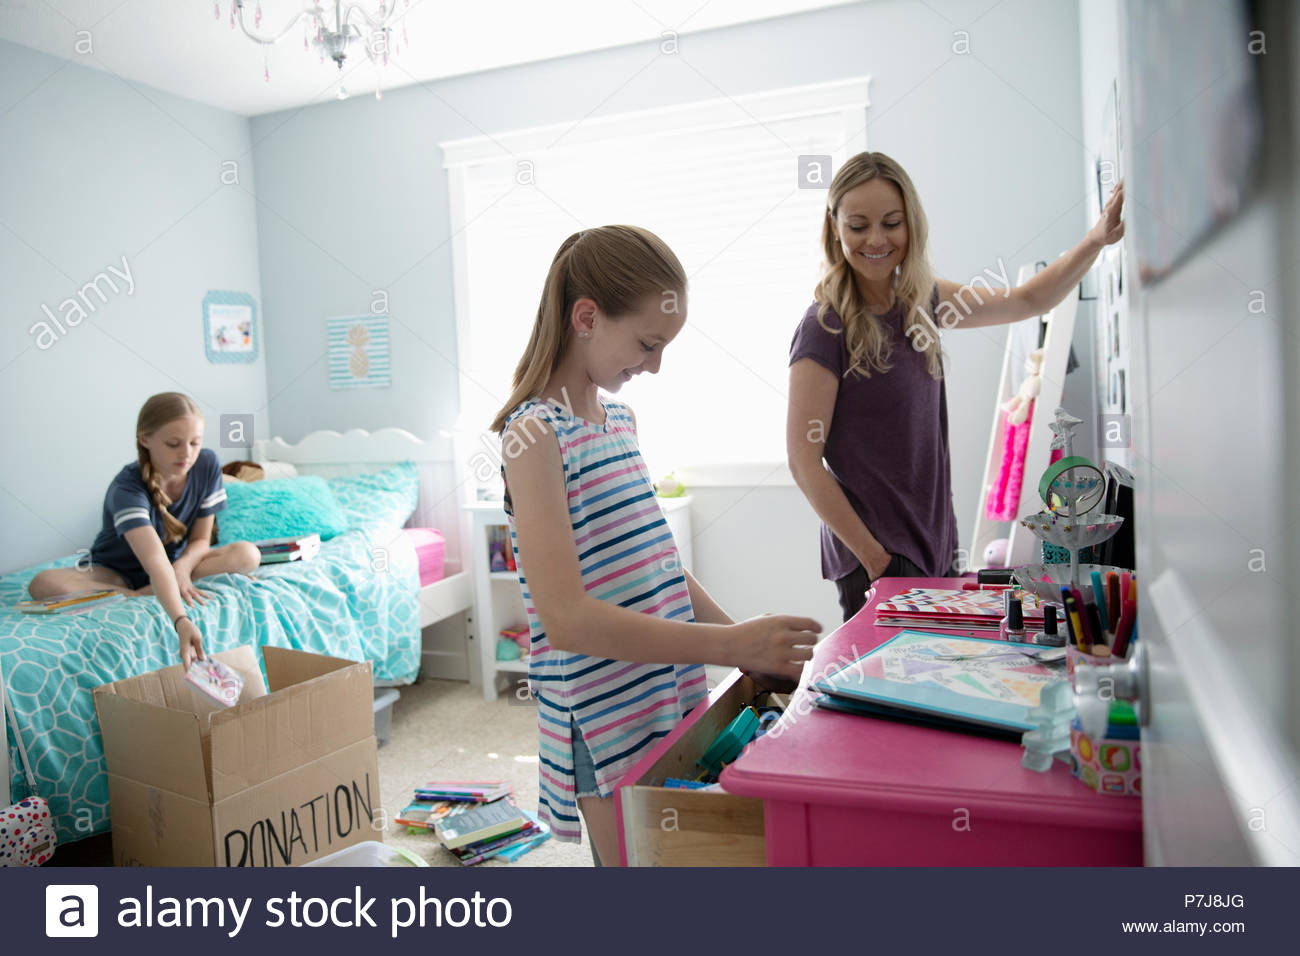 Mother and daughters organizing bedroom, donating Stock Photo